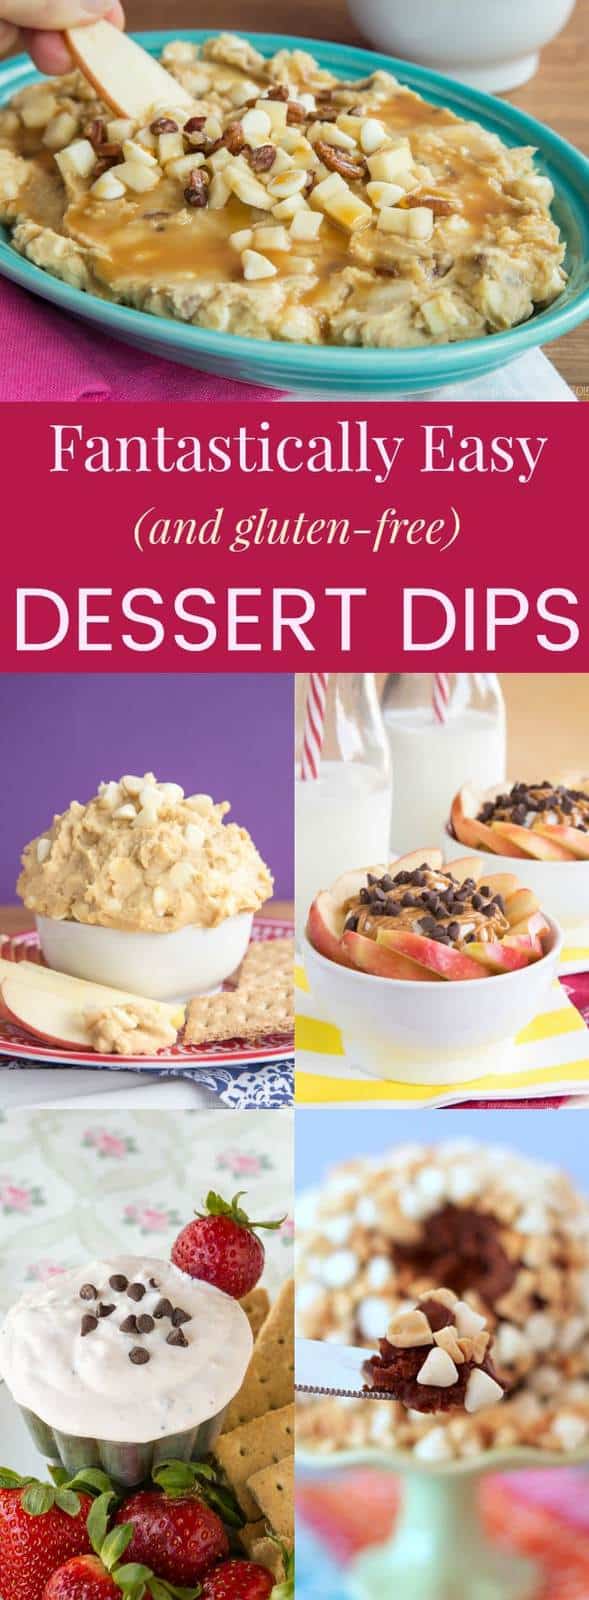 Fantastically Easy Dessert Dips - these dip recipes are a fast way to enjoy a sweet treat that's no-bake, naturally gluten free (some are even vegan), and most are better for you because they are made with healthy ingredients.